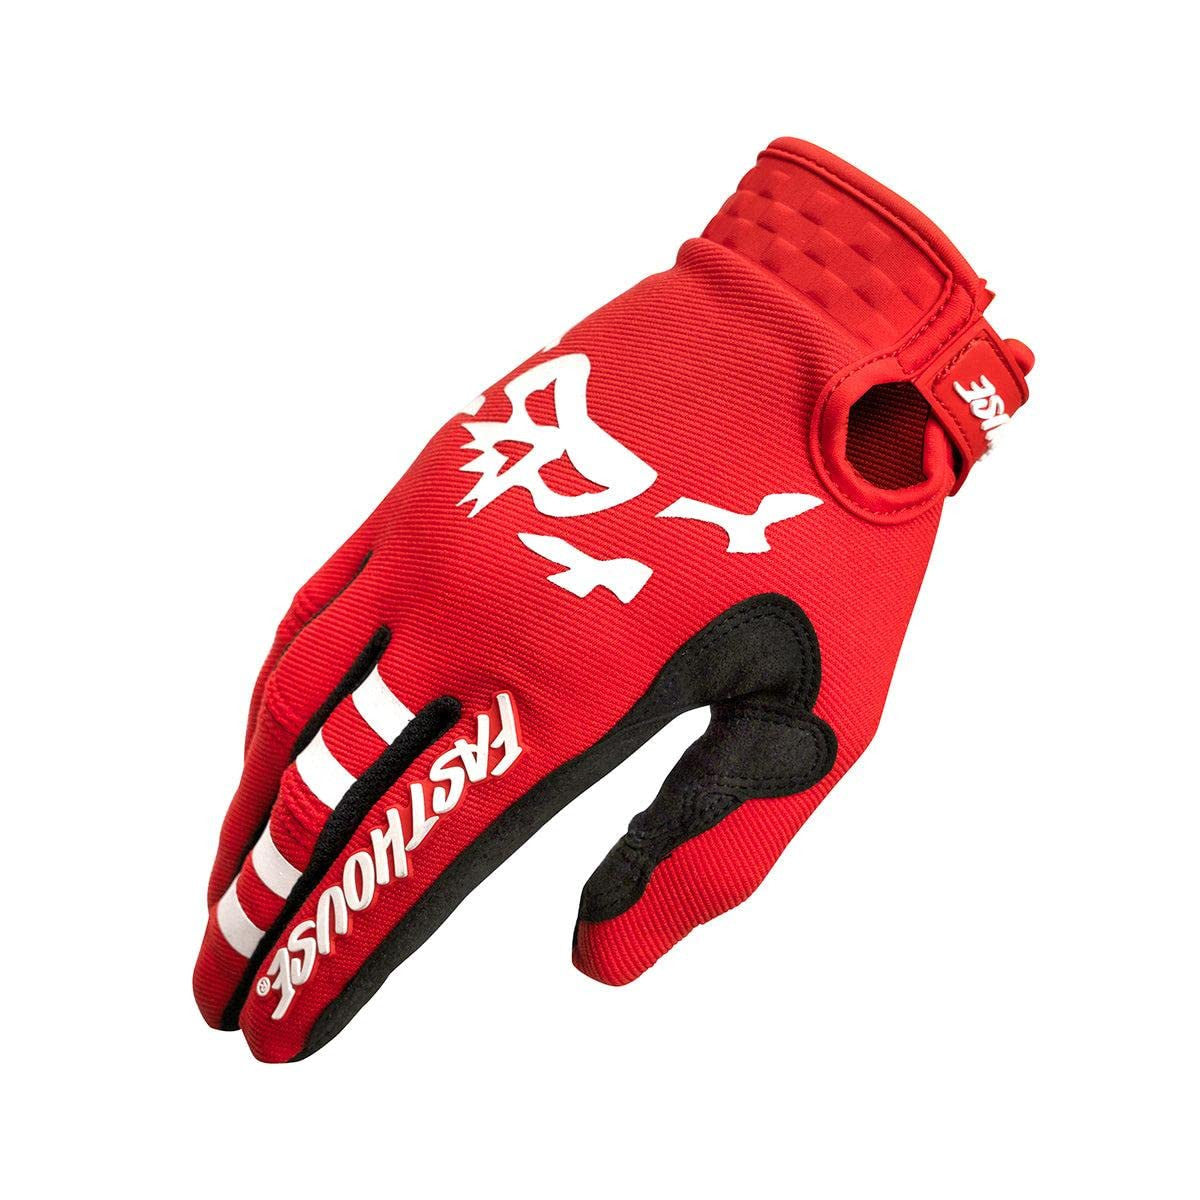 Fasthouse Youth Speed Style Glove Slammer - Red YM Bike Gloves